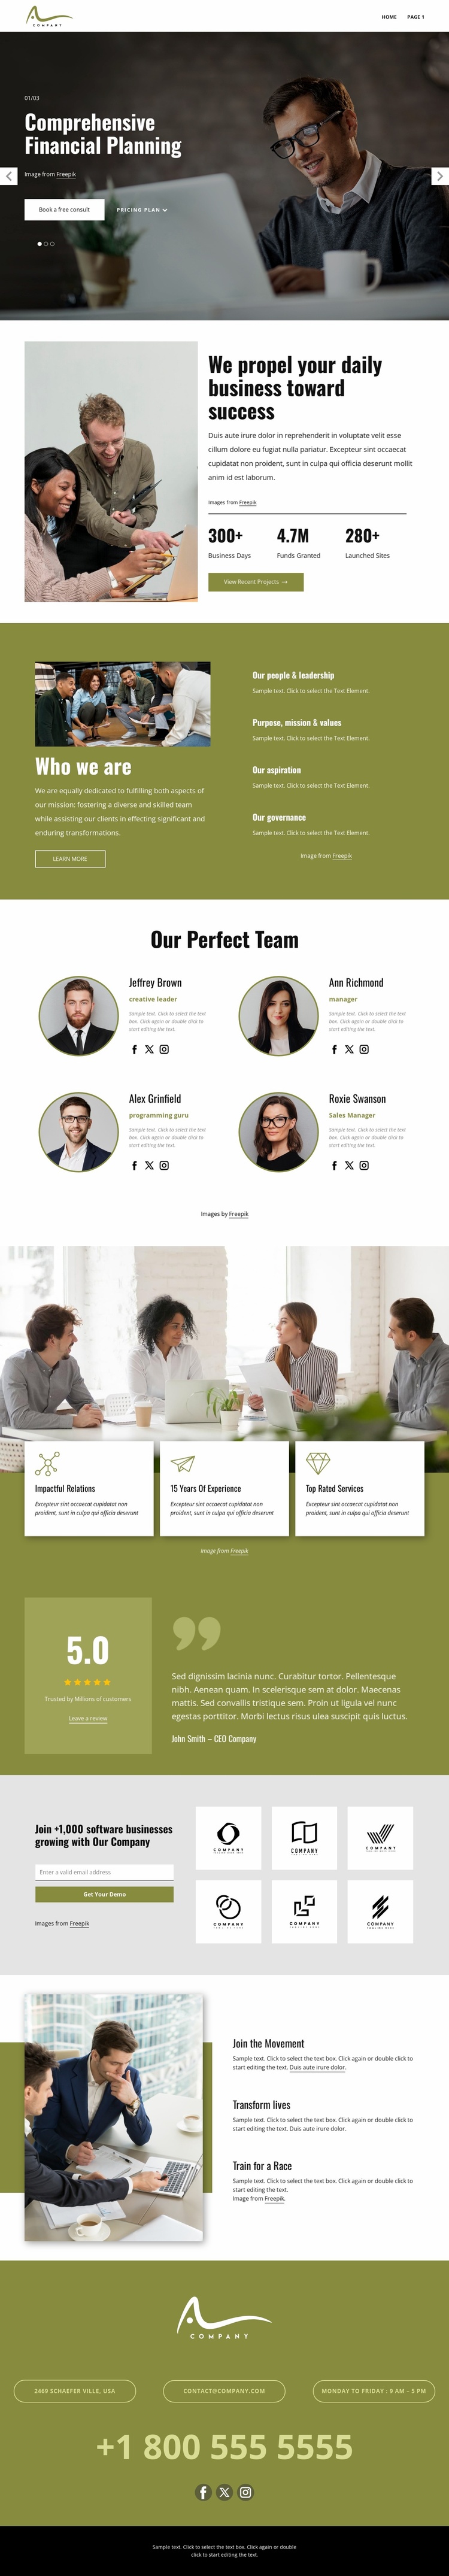 Strategic consulting solutions Website Template